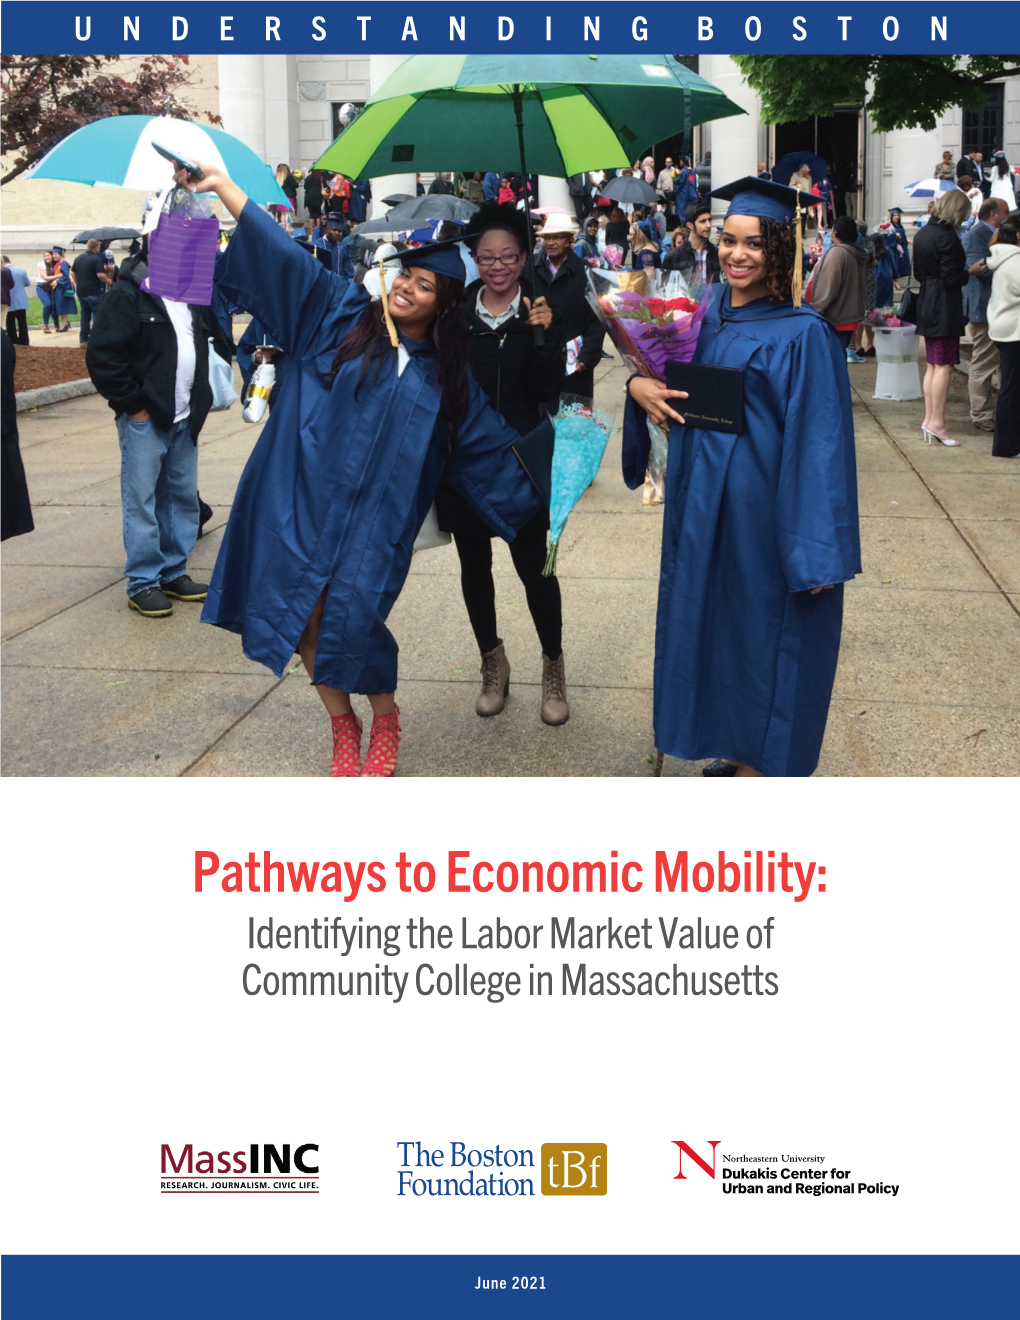 Pathways to Economic Mobility: Identifying the Labor Market Value of Community College in Massachusetts